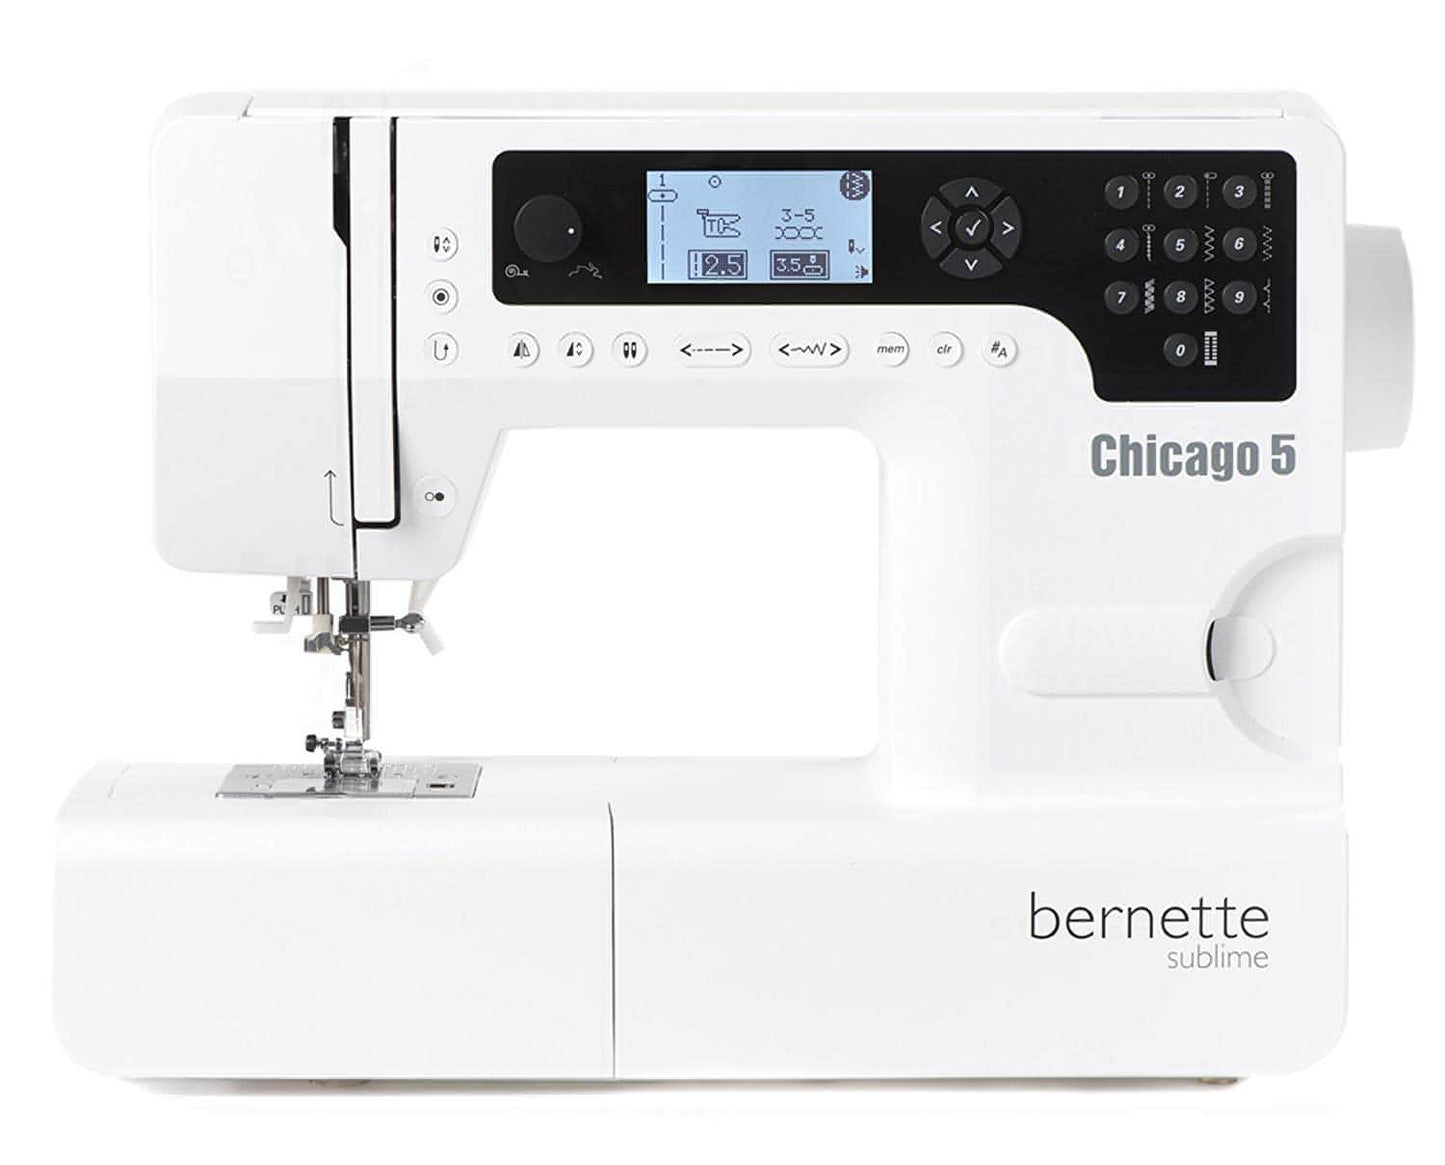 bernette by BERNINA Chicago 5 * amazing quality 200 stitch patterns with alphabet * Sewing Machine - Ex Display